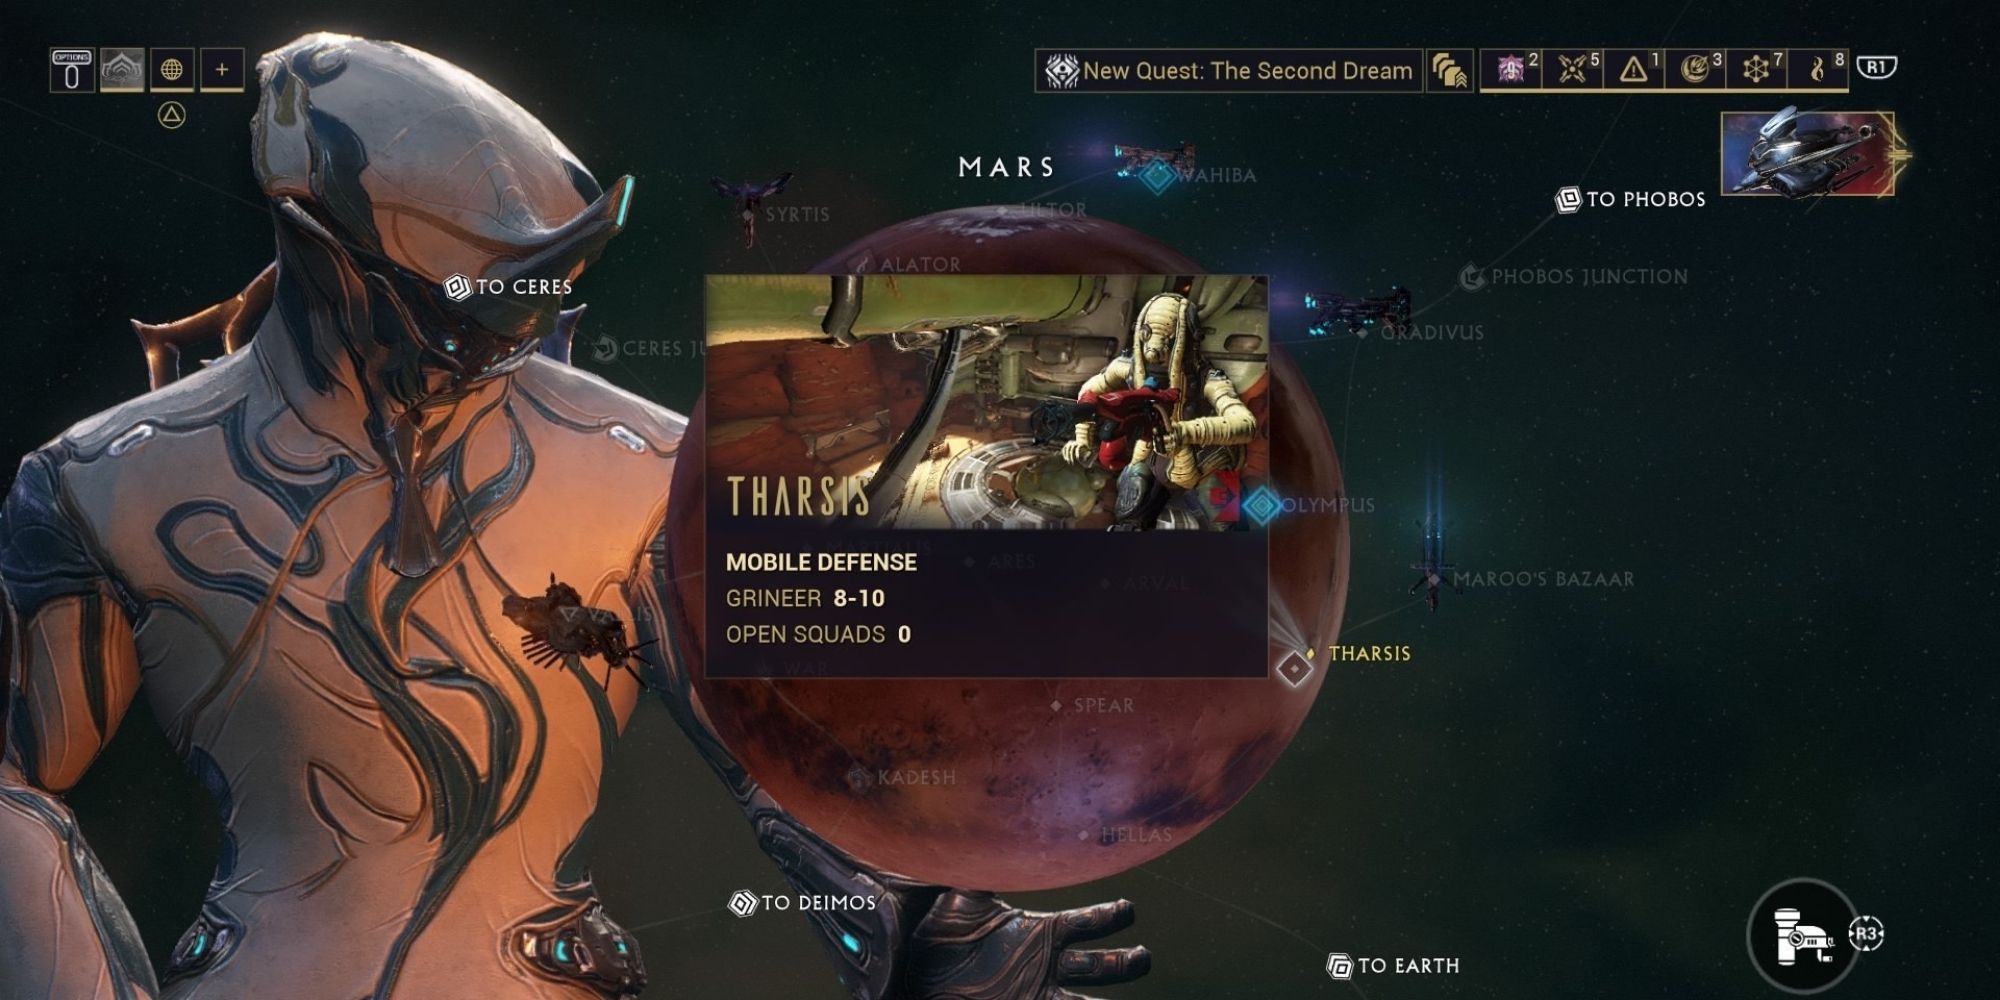 The Tharsis mission on Mars on Warframe.